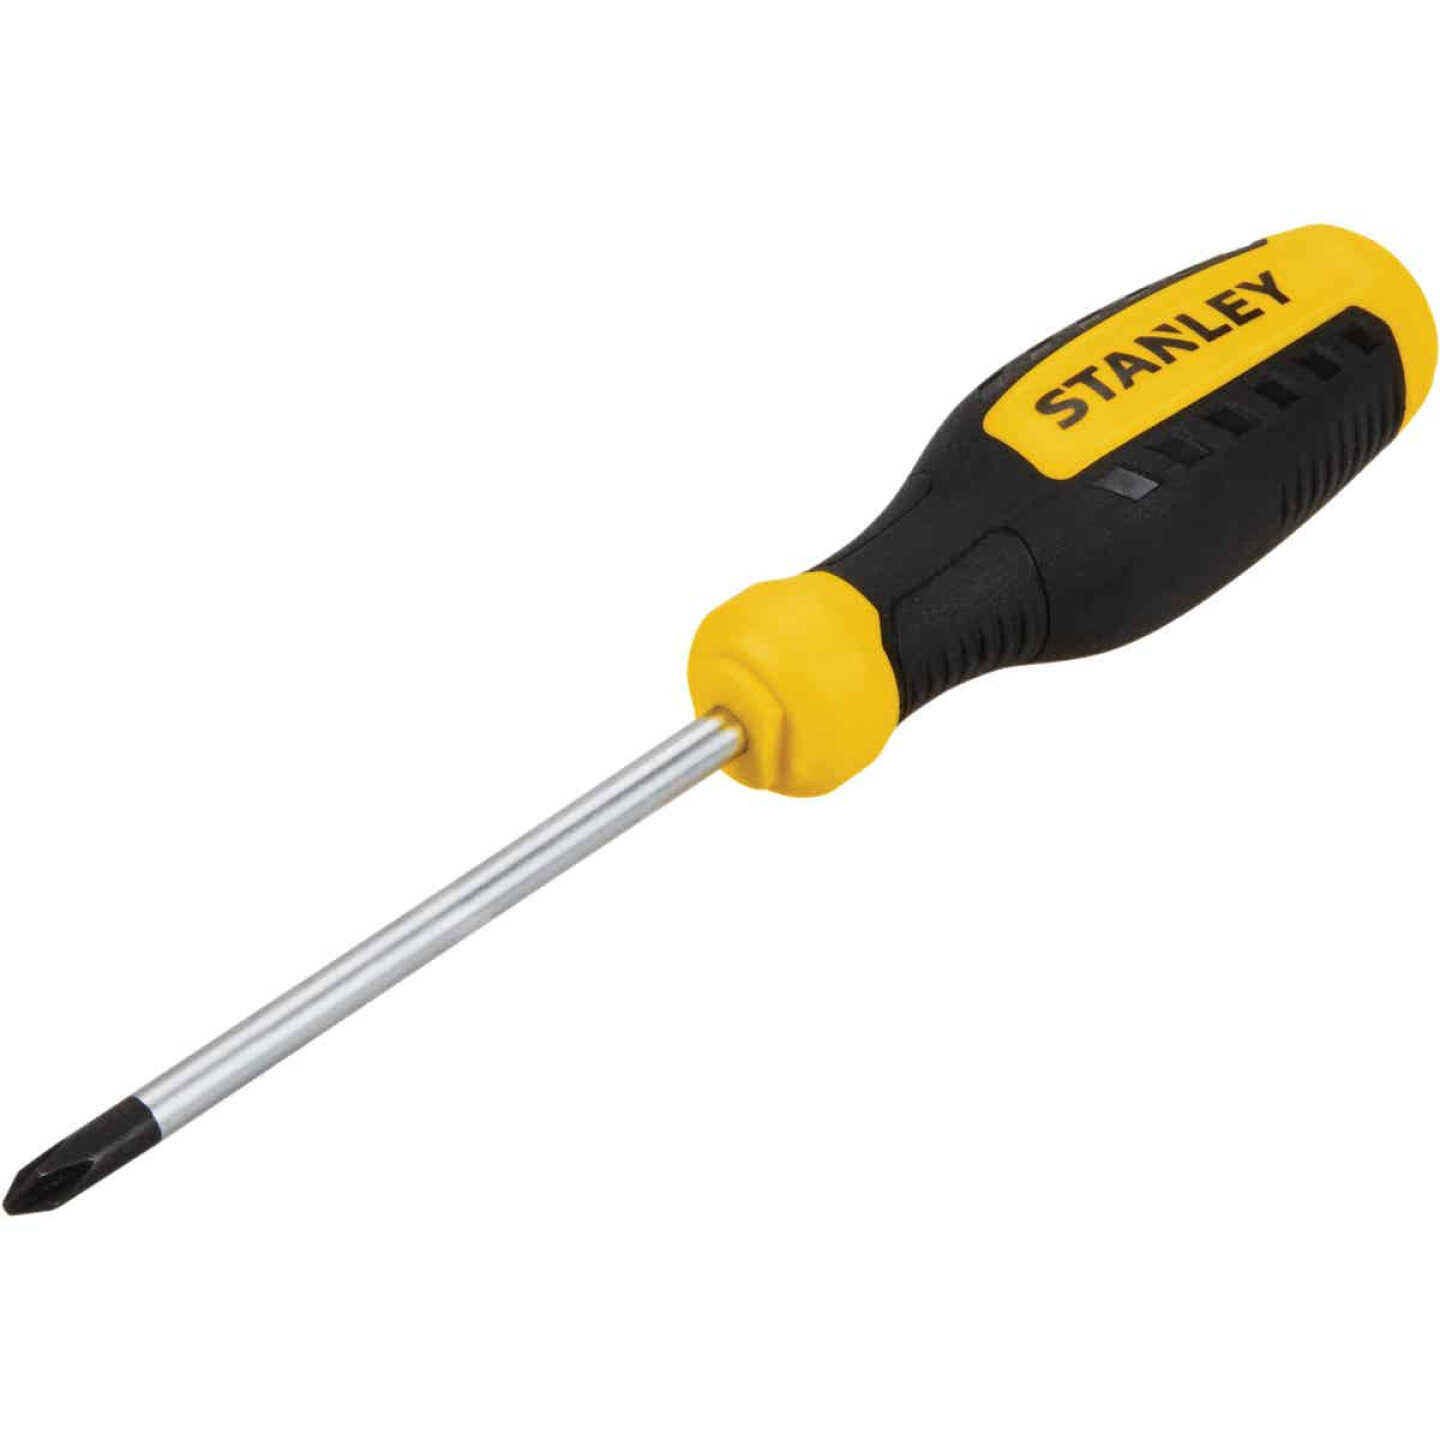 STANLEY 64-104-A - #4 Point Size Phillips Screwdriver